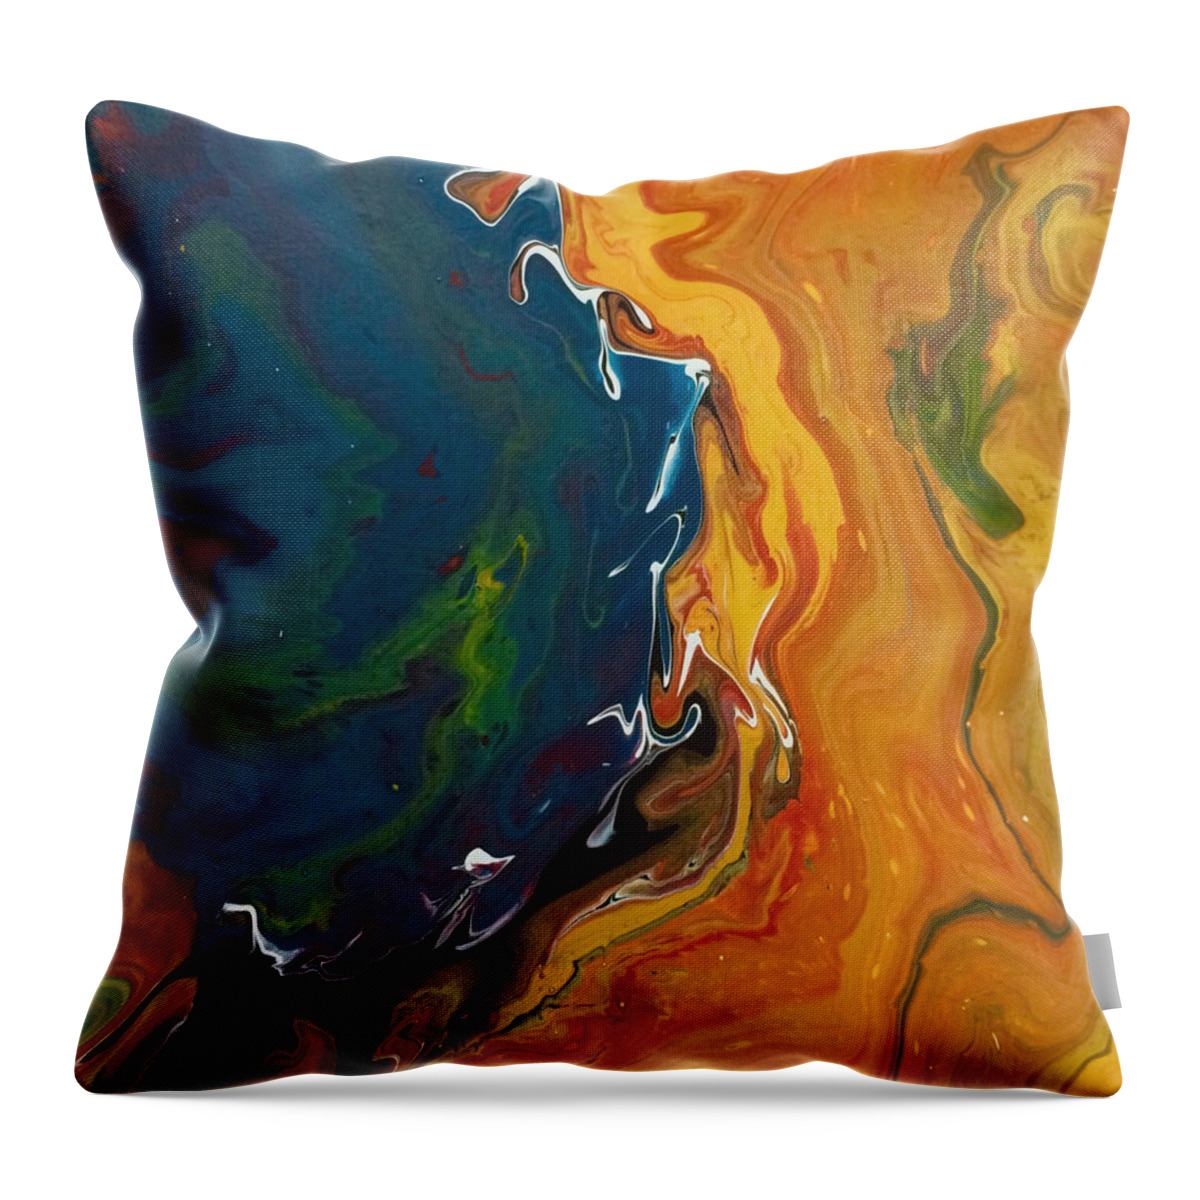 Abstract Throw Pillow featuring the painting Opposing Views 1 by Lon Chaffin